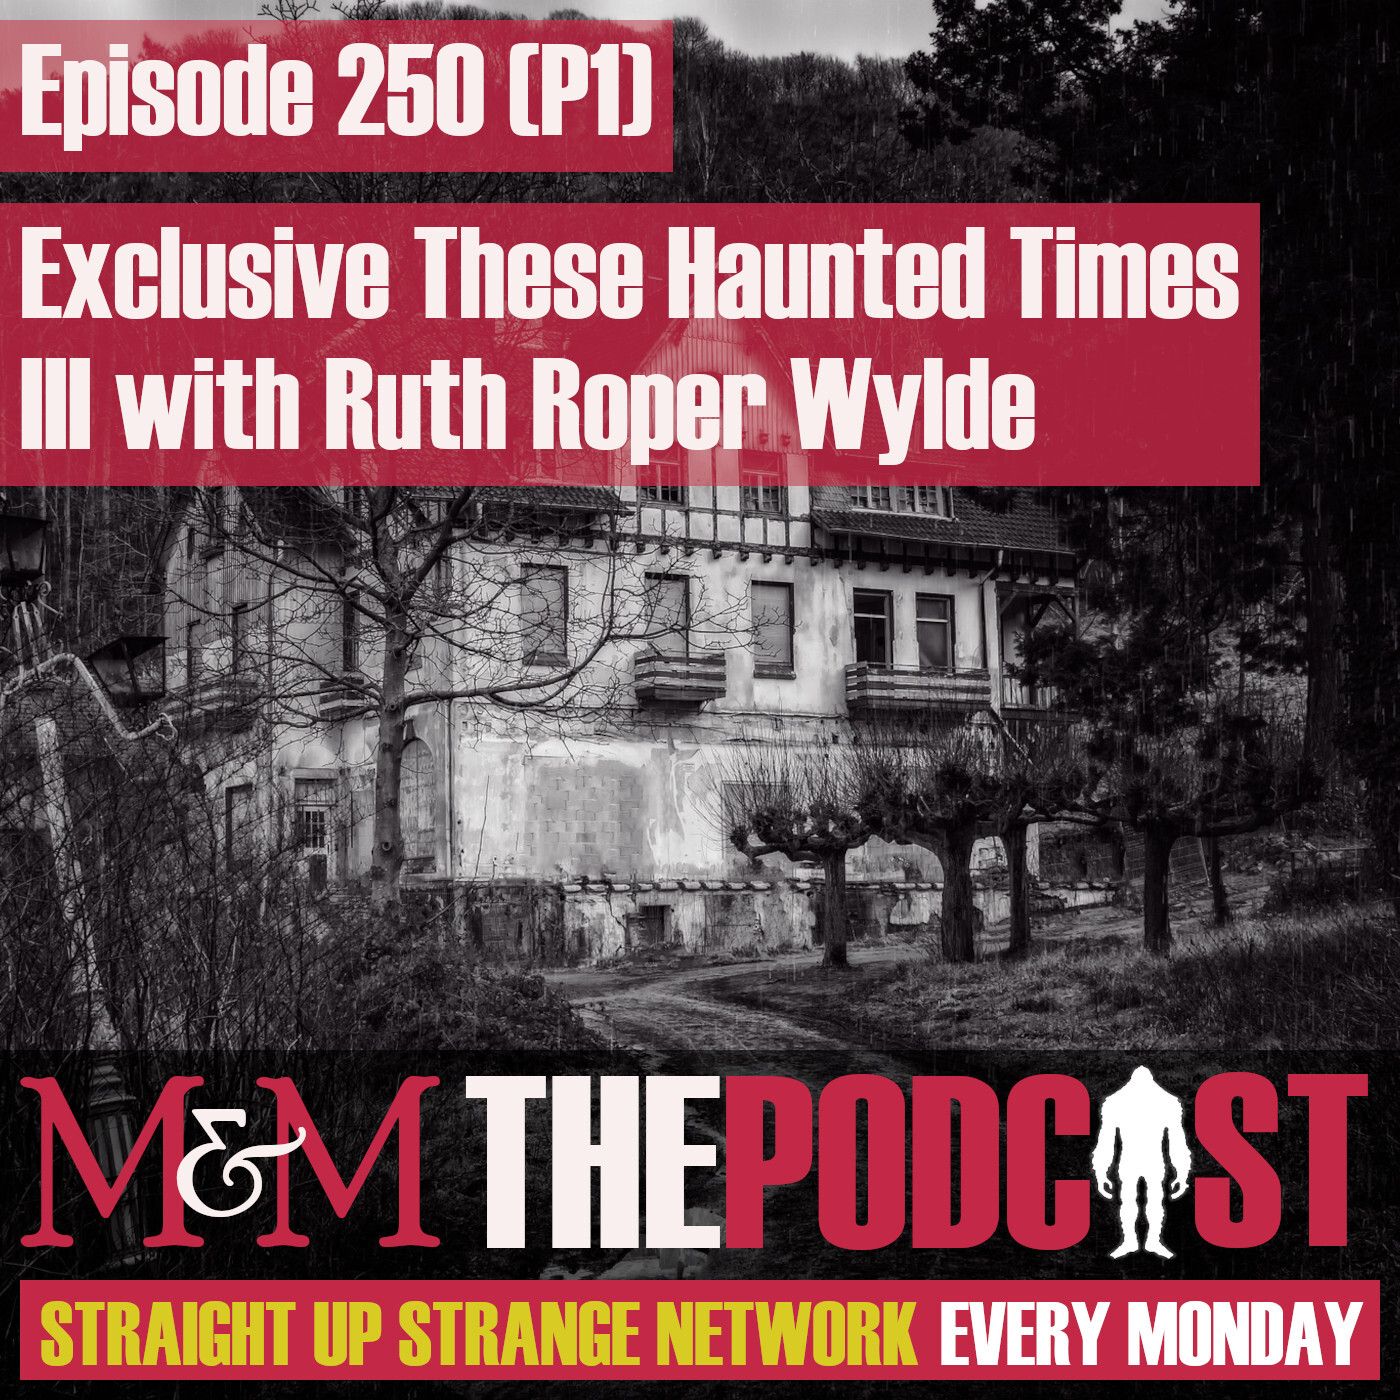 Mysteries and Monsters: Episode 250 Part One - These Haunted Times III exclusive with Ruth Roper-Wylde